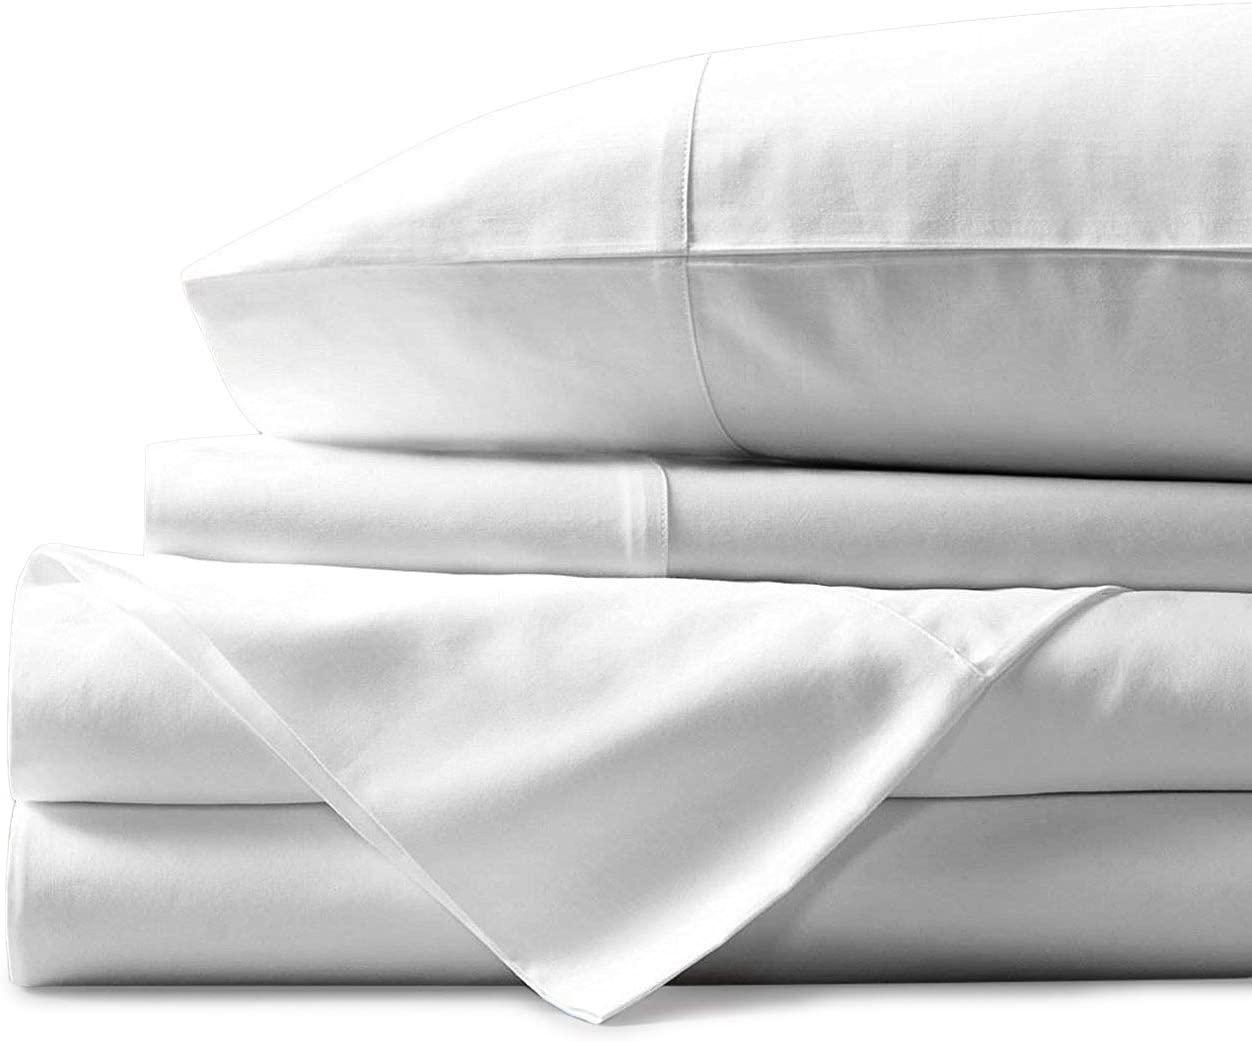 Mayfair Linen 800 Thread Count Egyptian Cotton Sheets for $57.99 Shipped